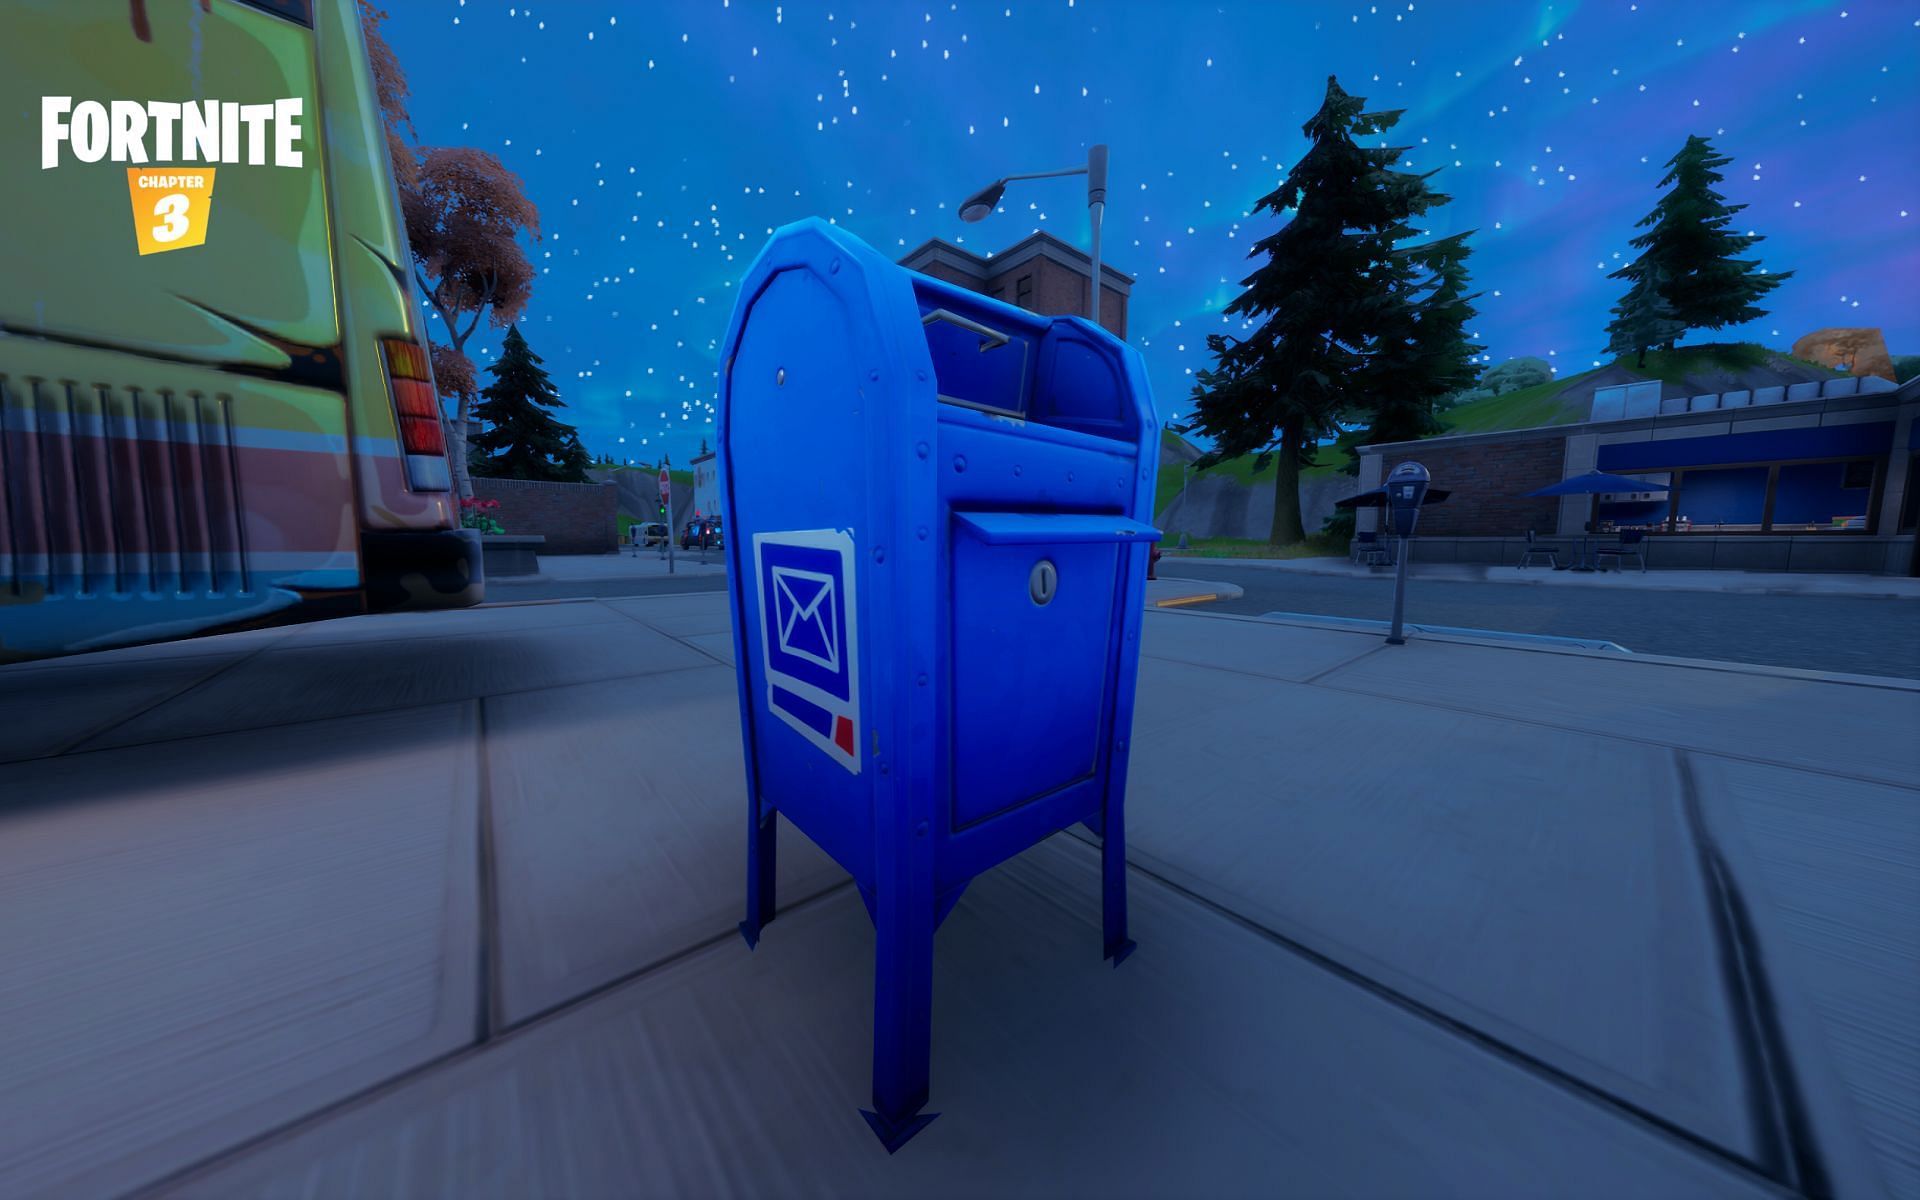 Wonder if any of the NPCs get any mail in-game (Image via Epic Games/Fortnite)